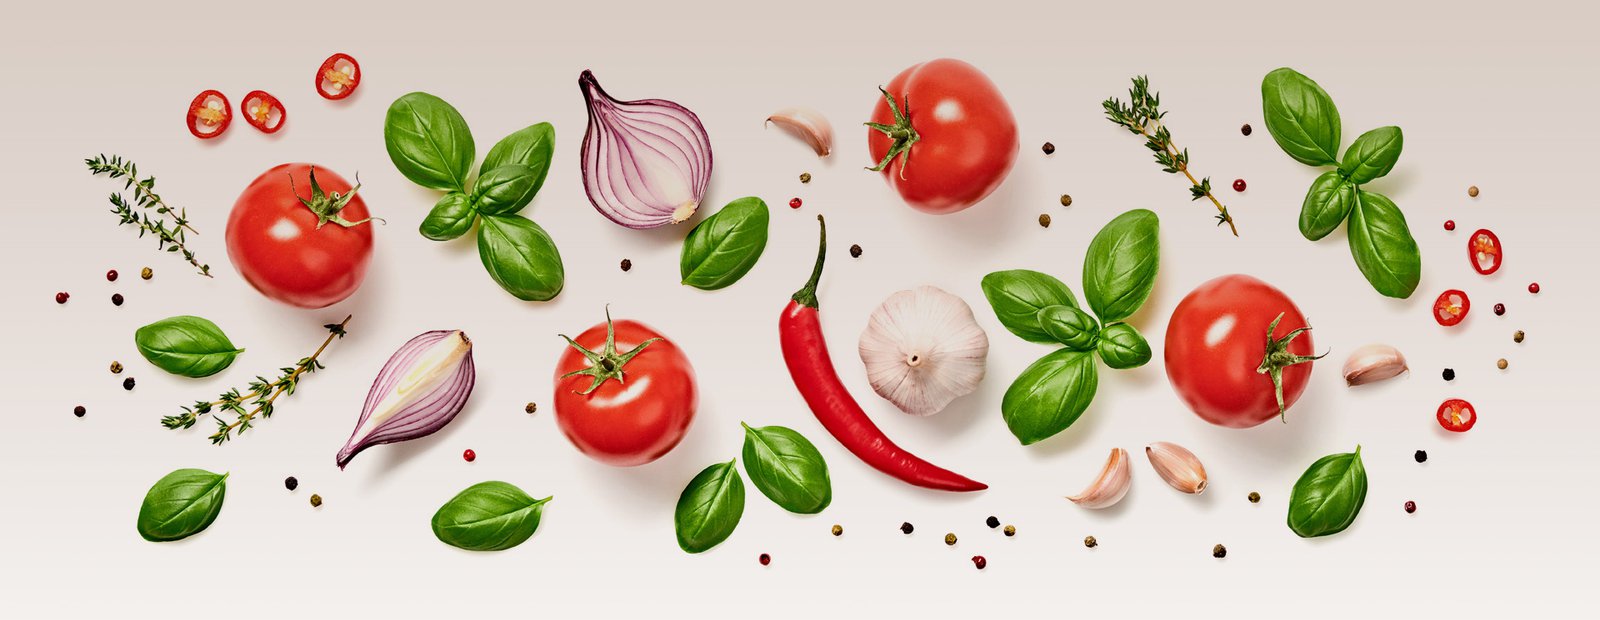 The tomato and the Mediterranean diet